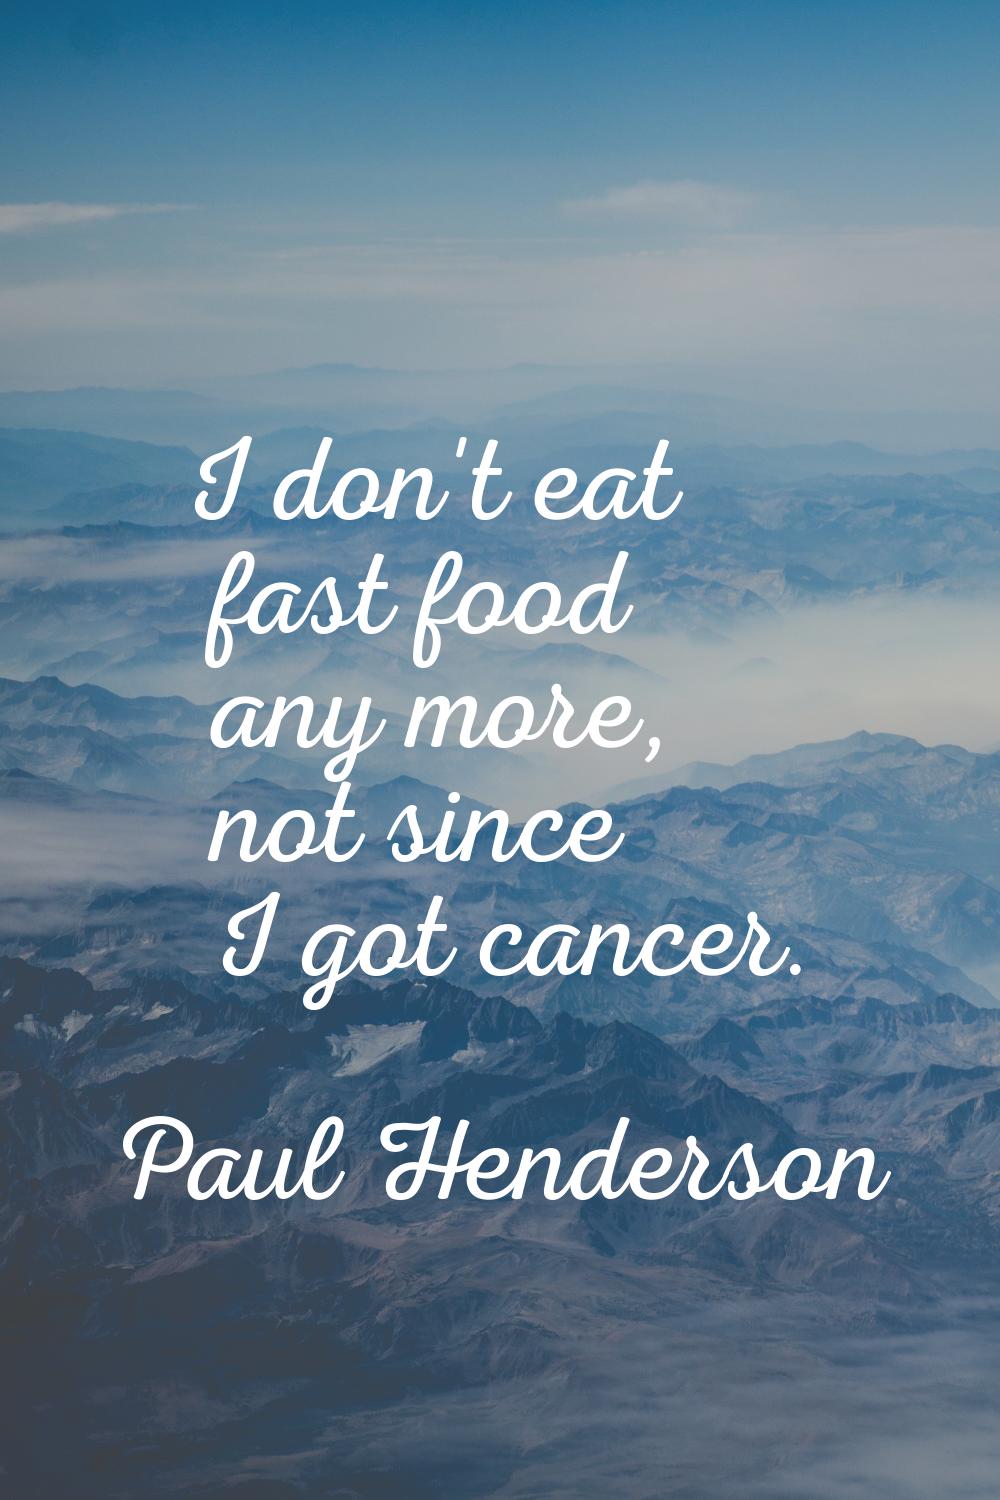 I don't eat fast food any more, not since I got cancer.